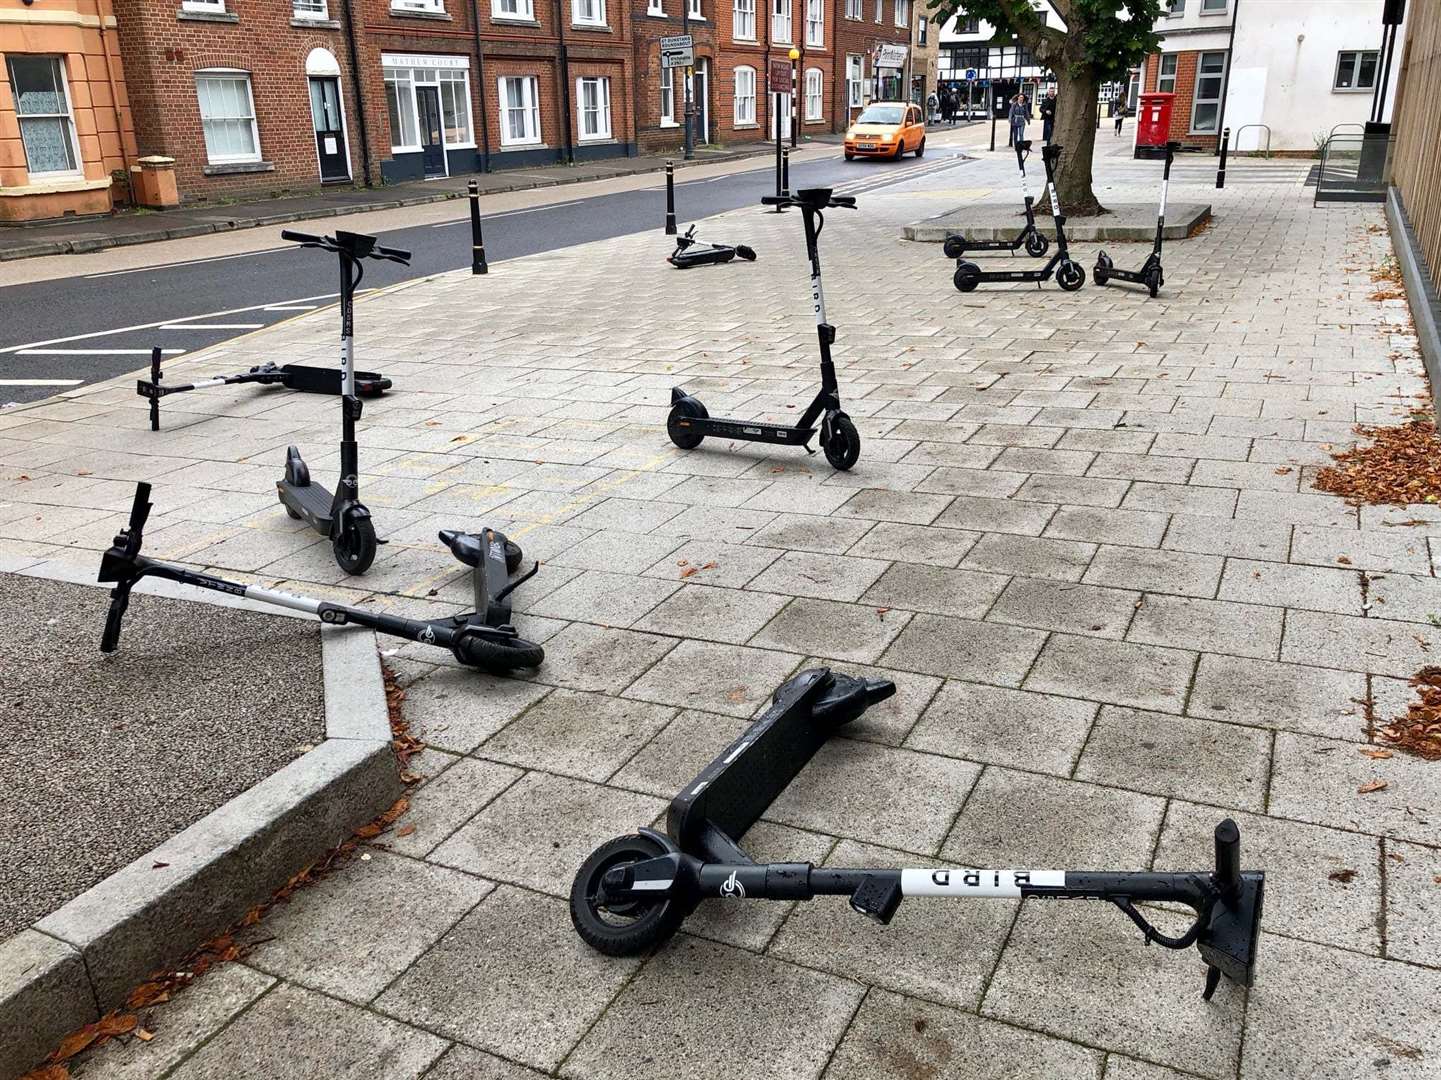 A number of Bird e-scooters have been left strewn across Station Road West, Canterbury. Picture: Sian Pettman